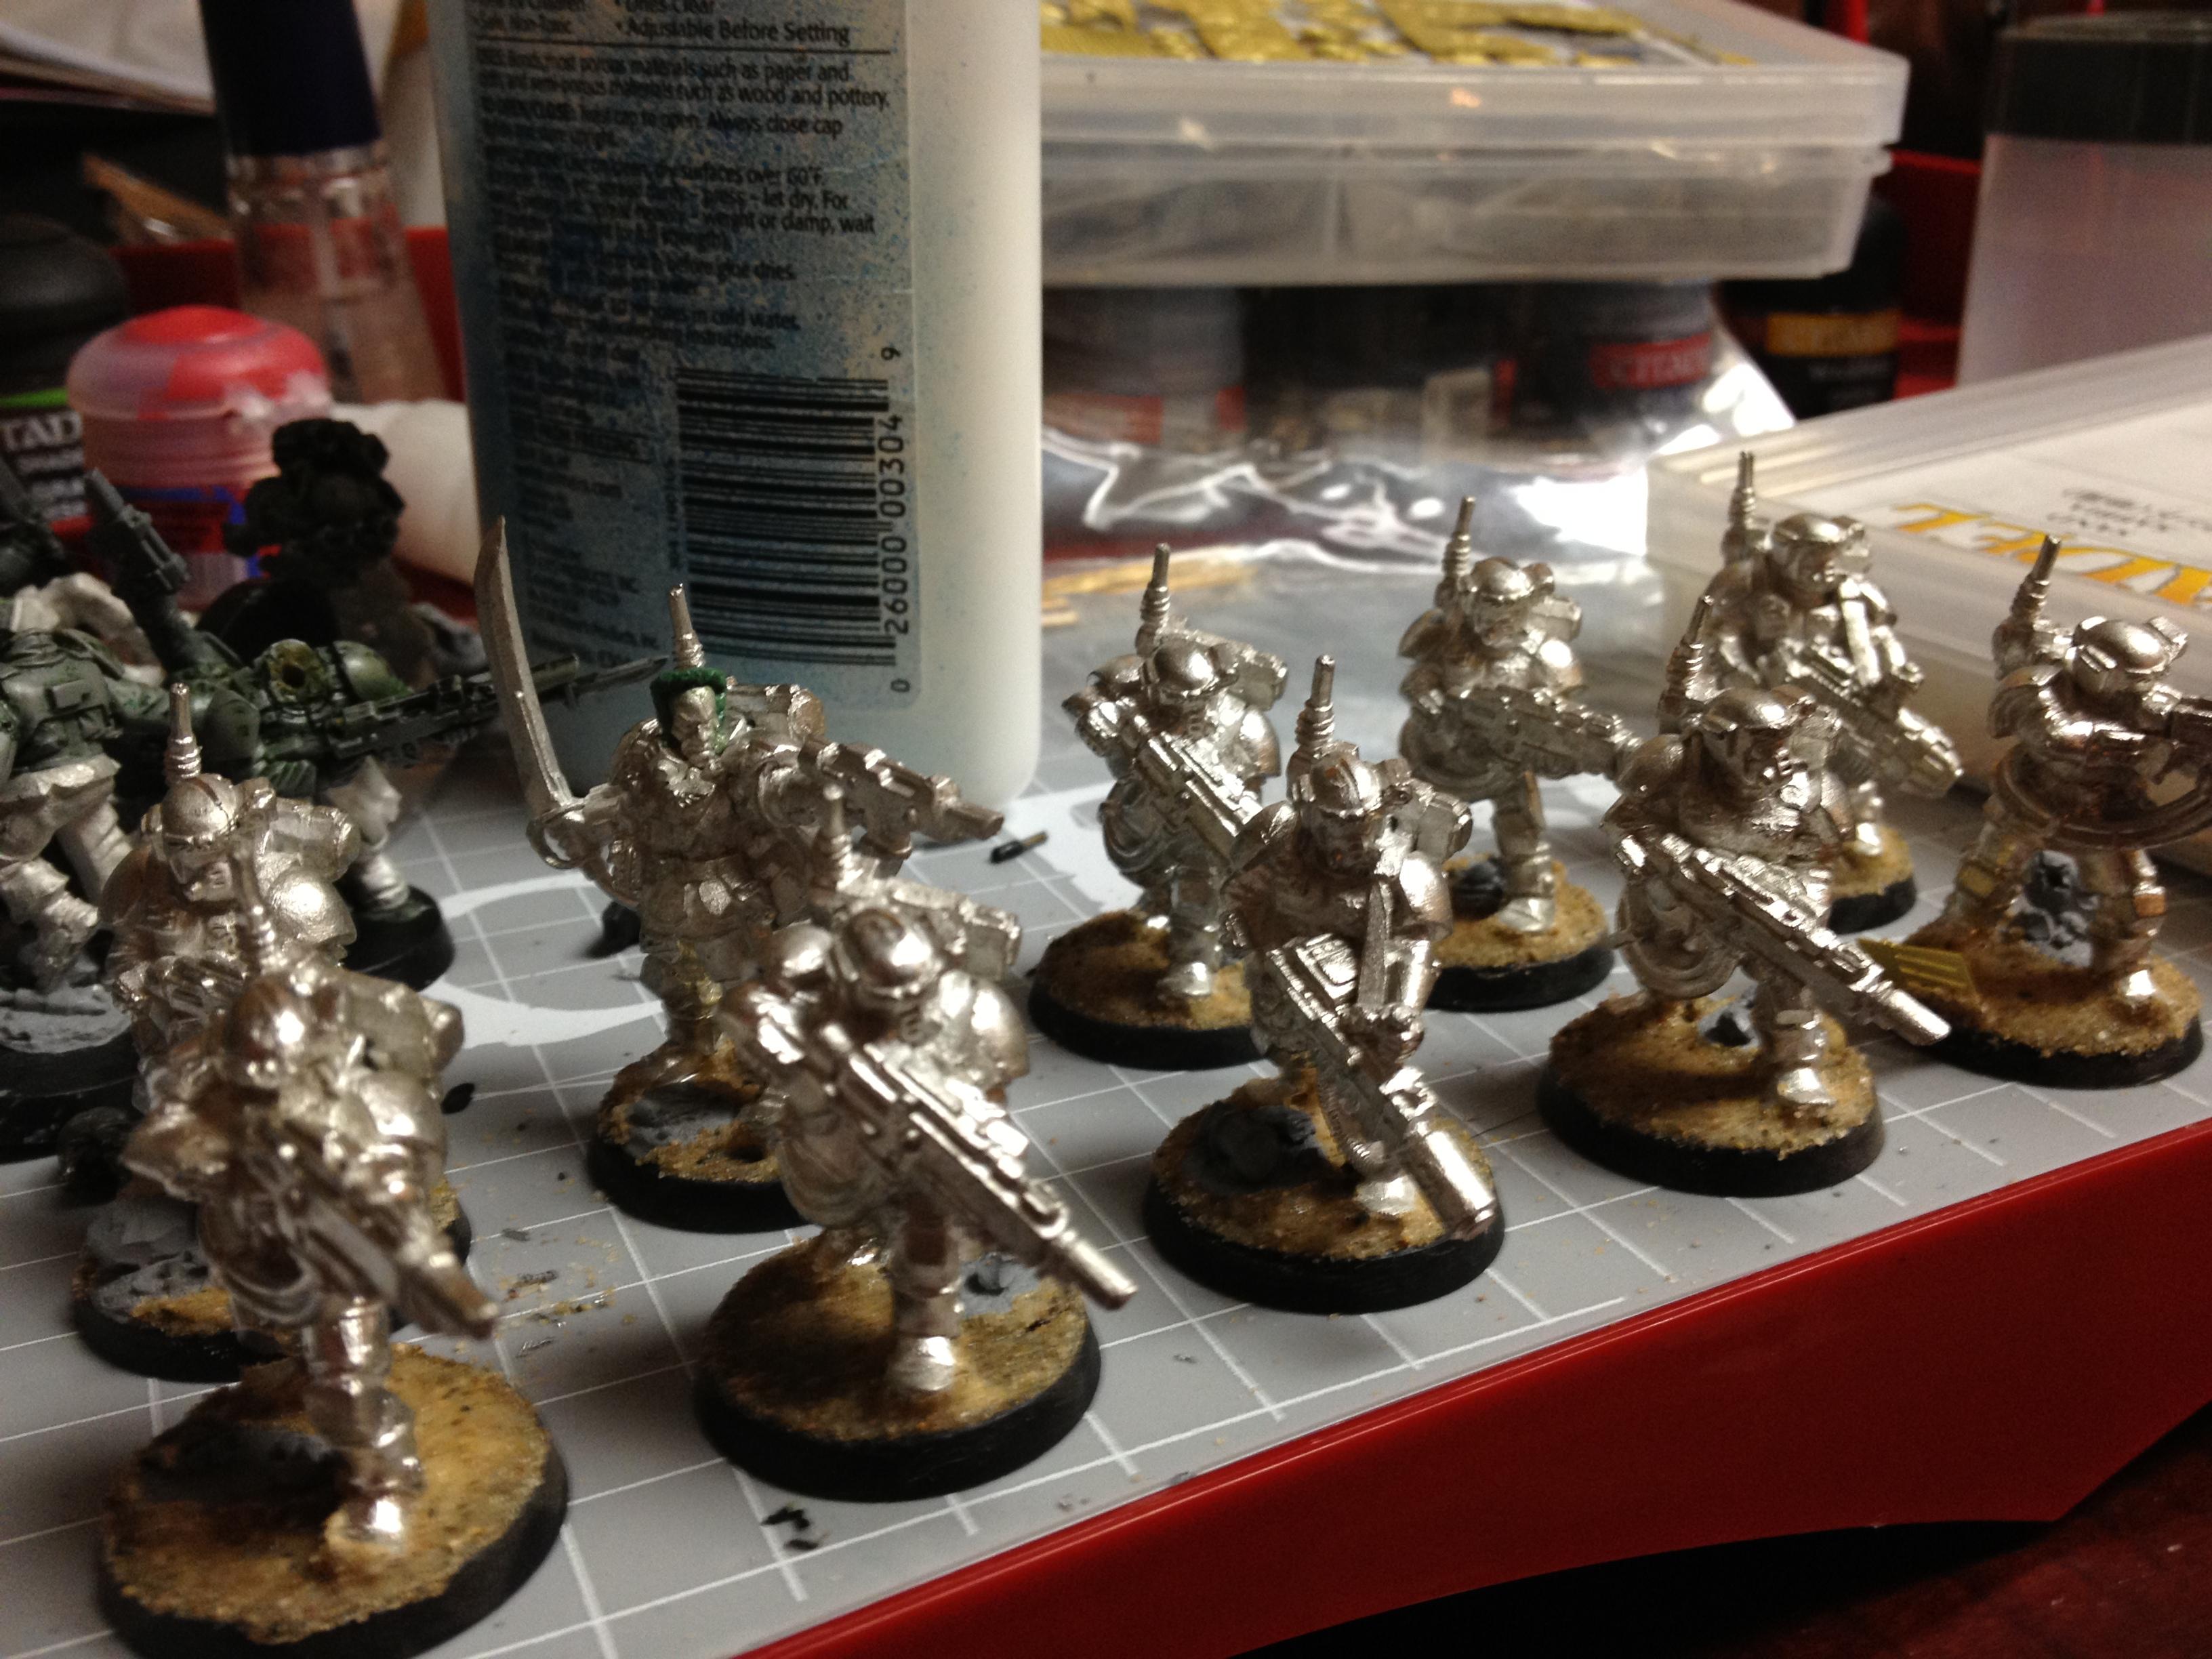 Here's the squad before I primed it (I'll get y'all a picture of the primed squad later)